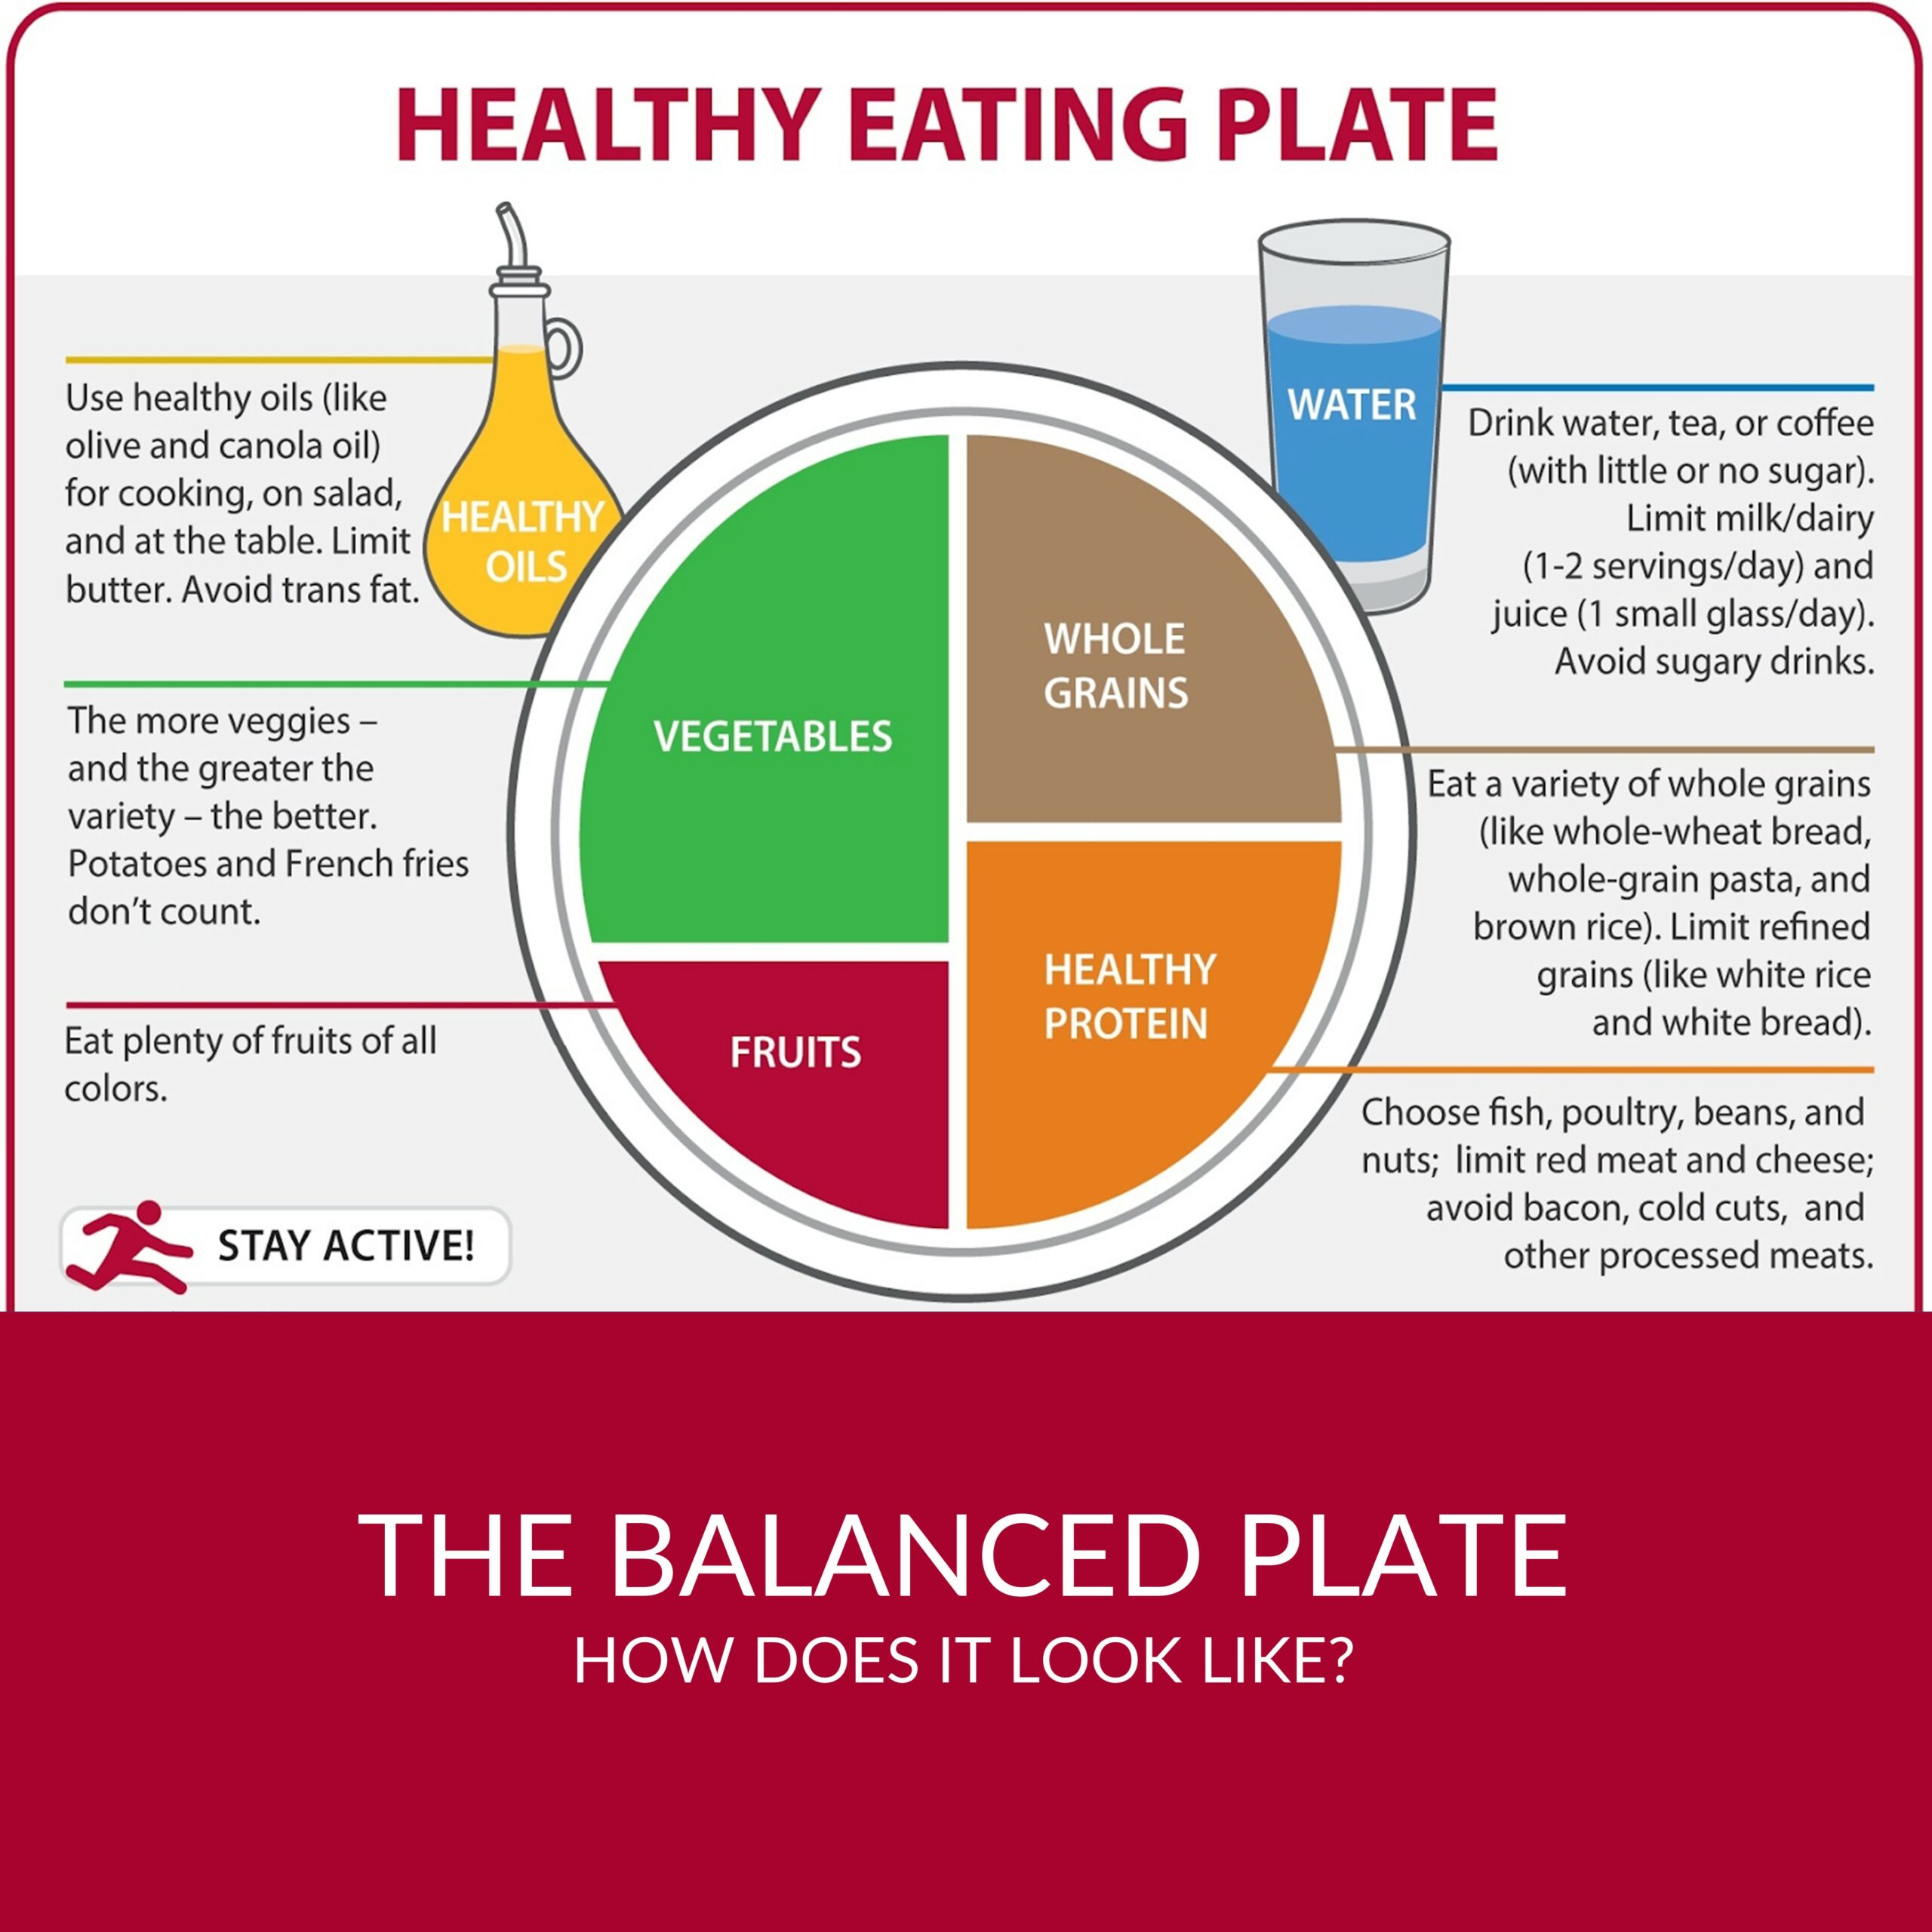 The Balanced Plate - What does it look like?